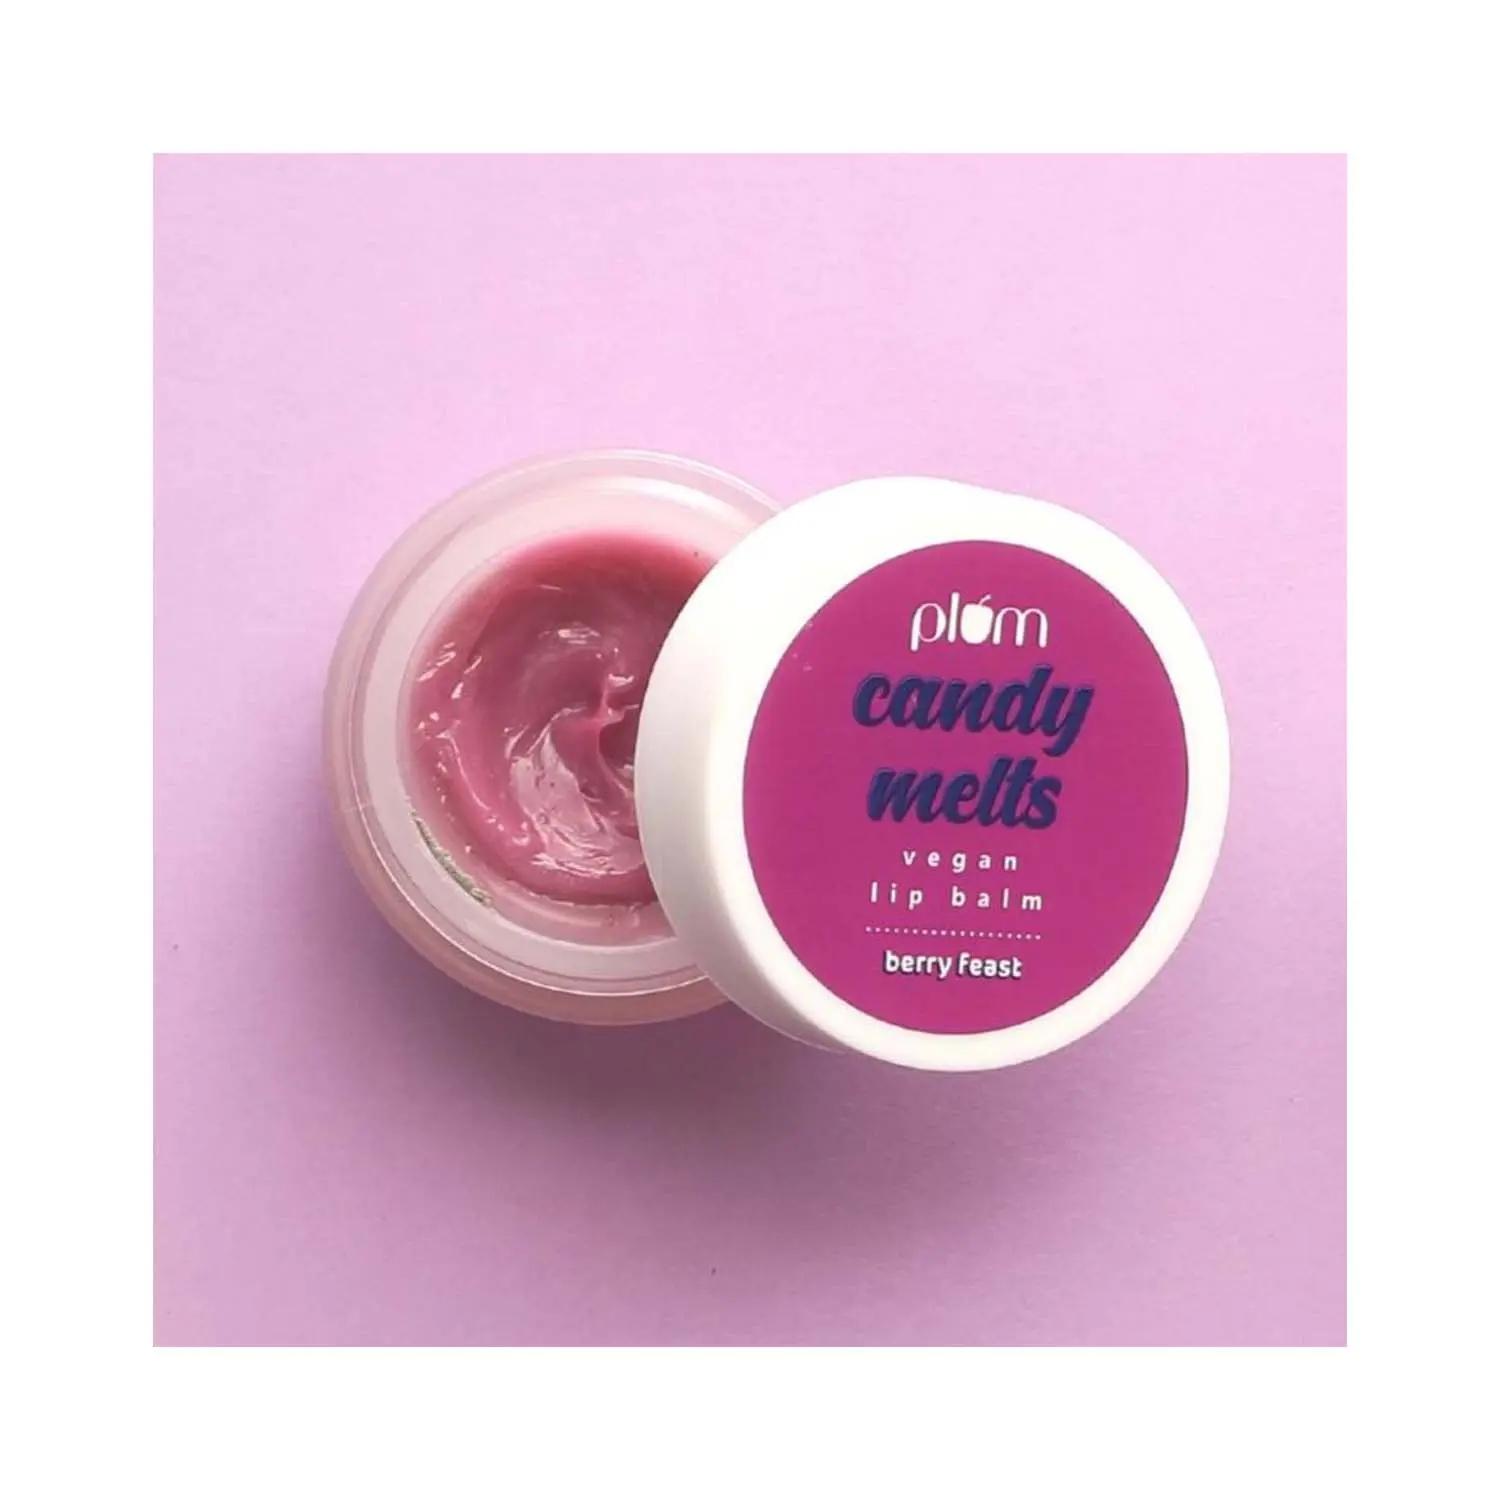 plum candy melts vegan lip balm berry feast, nourishes & protects, velvety smooth (12g)